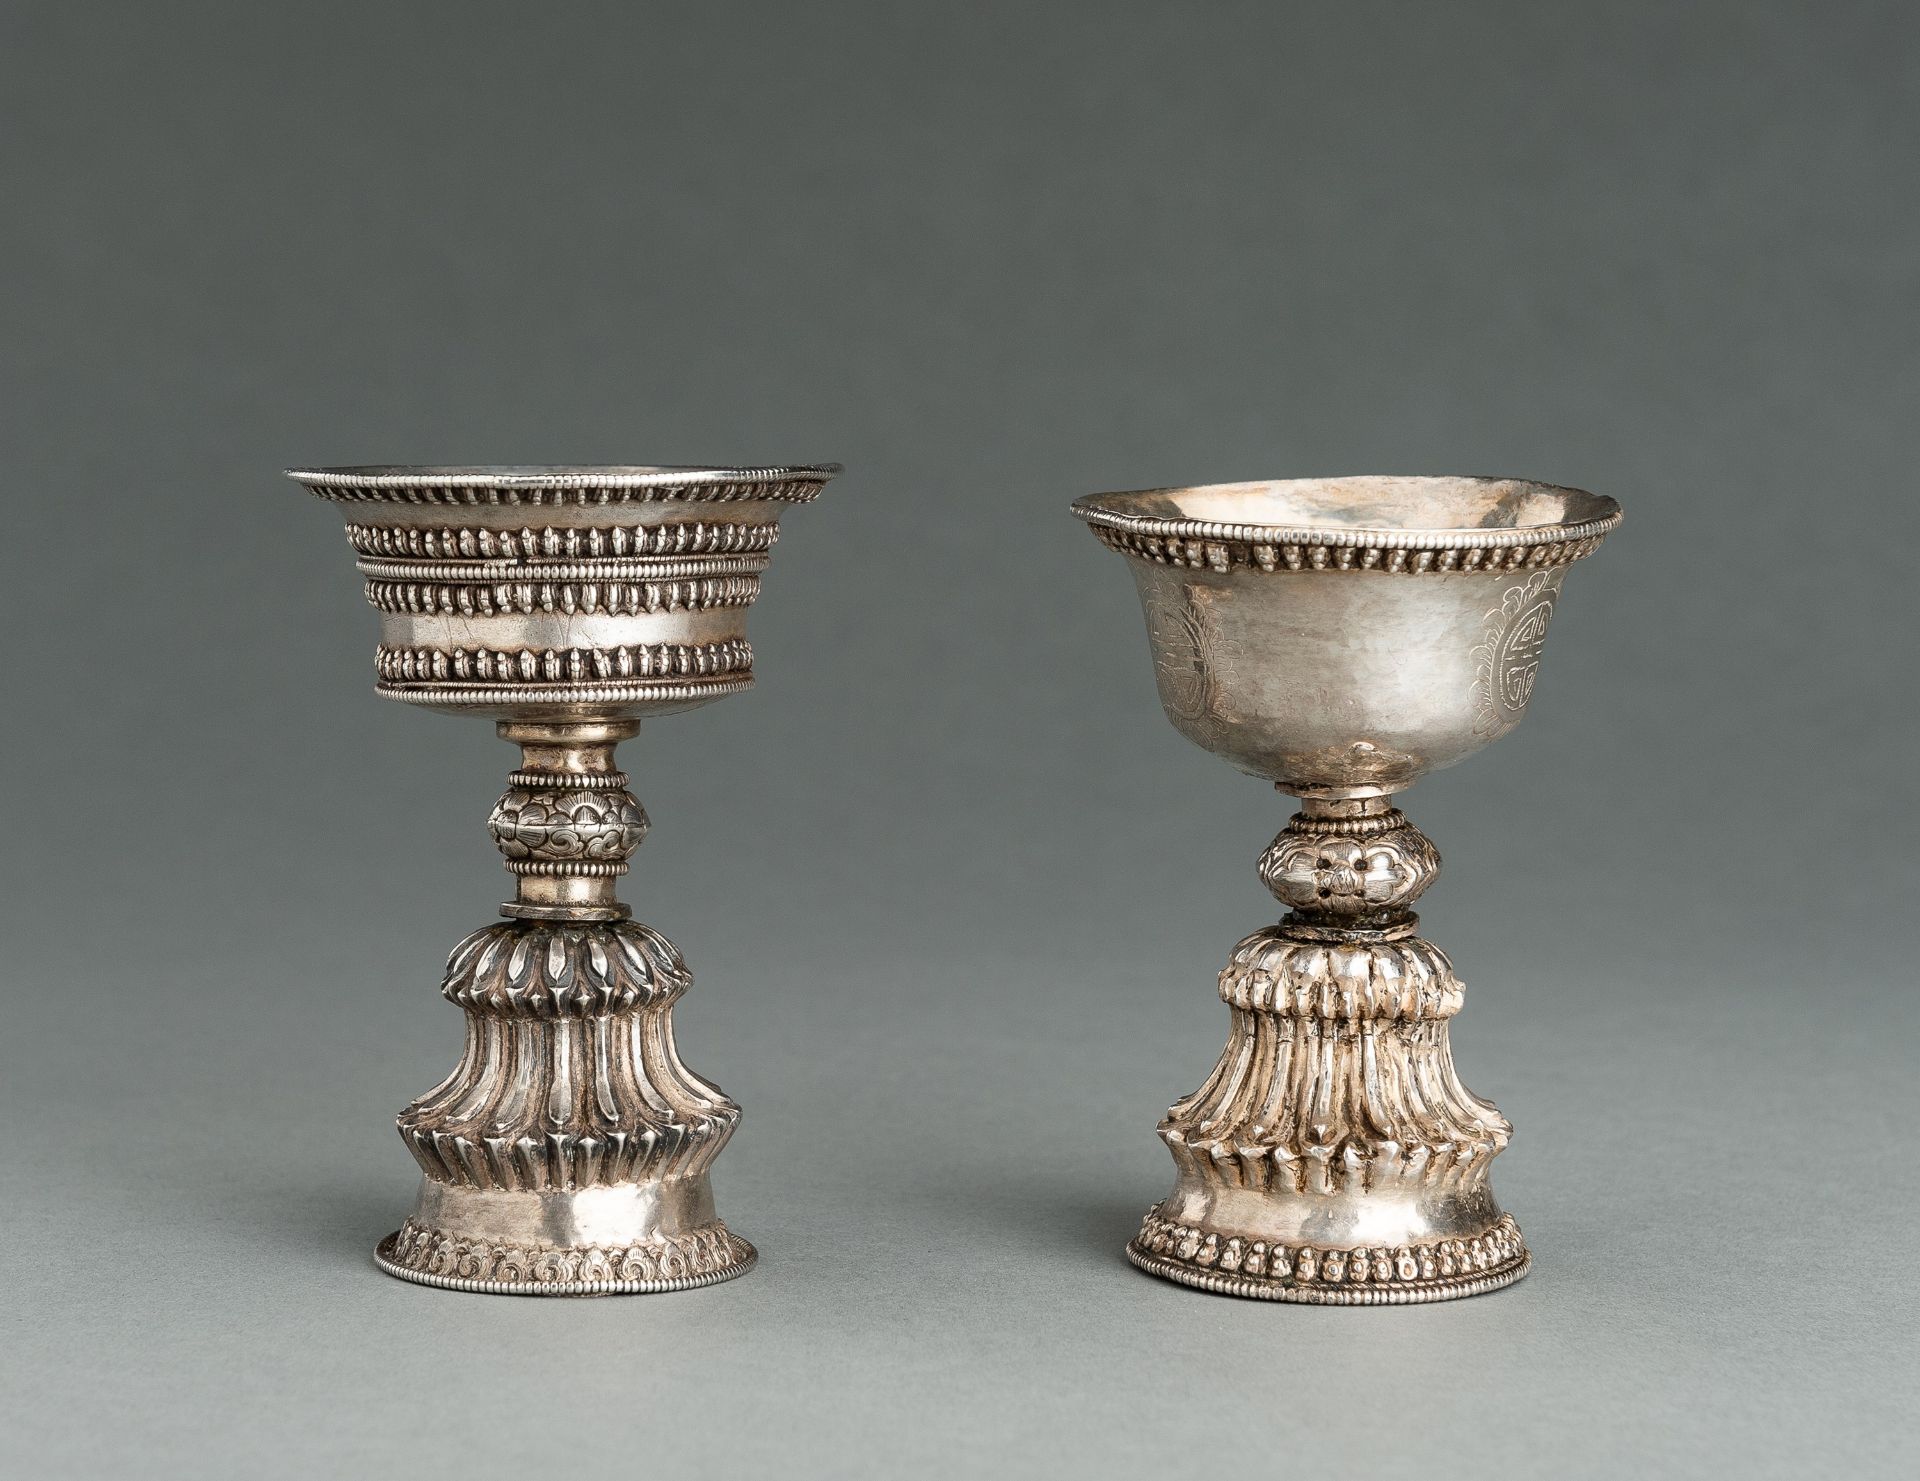 TWO TIBETAN SILVER BUTTER LAMPS, 19th CENTURY